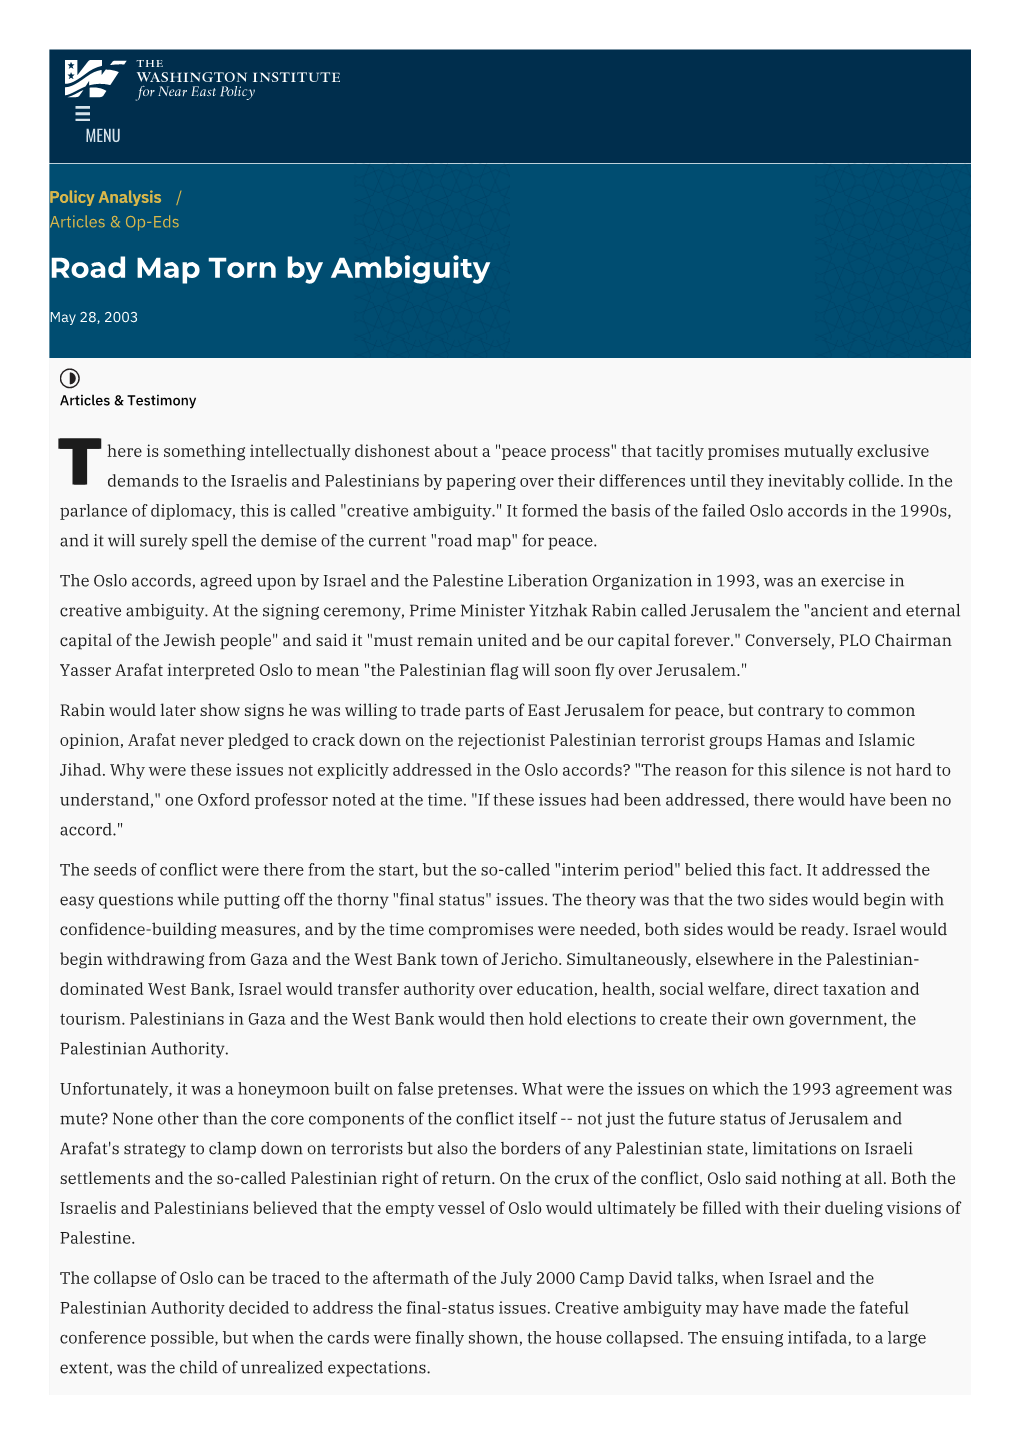 Road Map Torn by Ambiguity | the Washington Institute